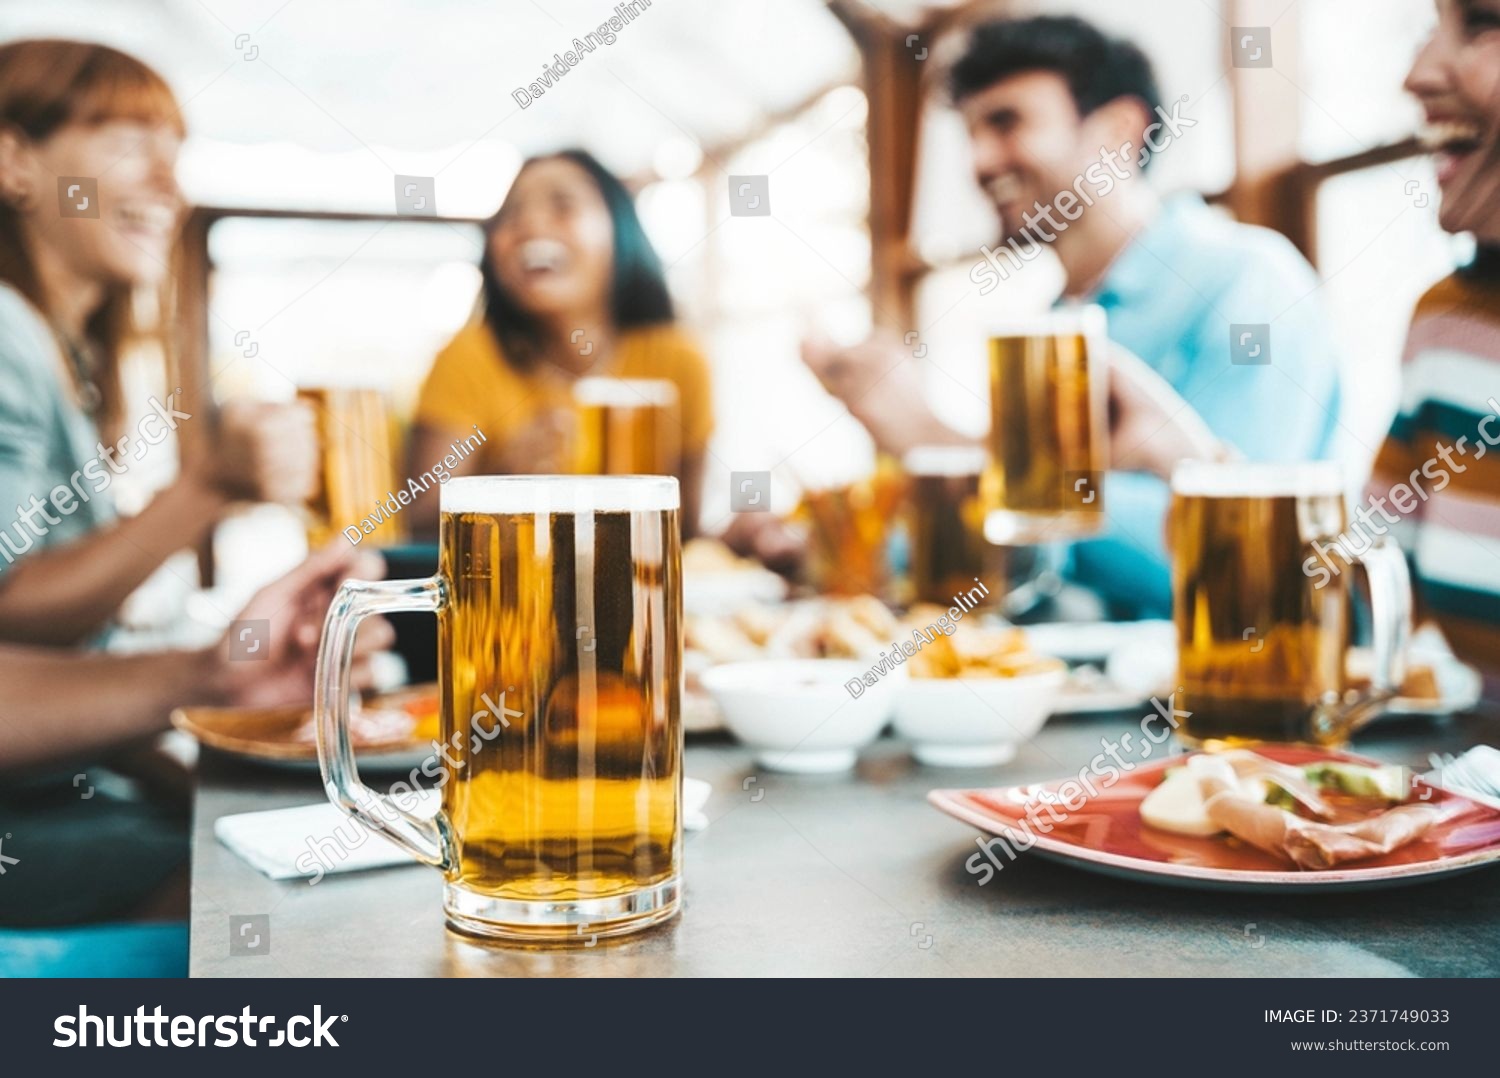 Happy people drinking beer at brewery pub restaurant - Group of friends enjoying happy hour sitting at bar table - Brewery life style concept with guys and girls dining together #2371749033